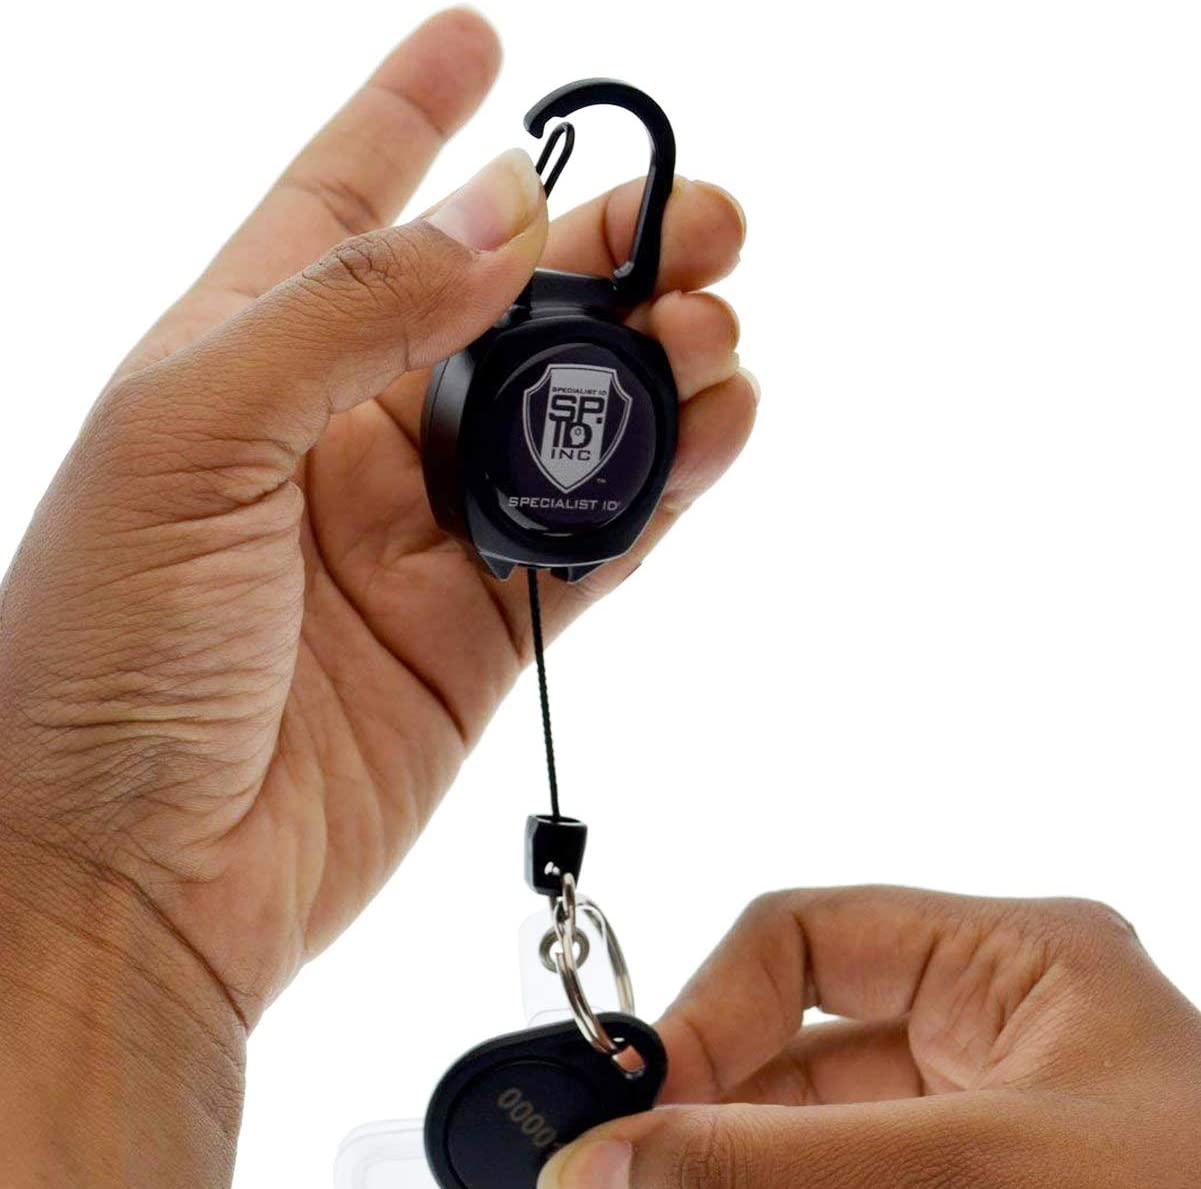 A person holds an SPID Key-Bak SIDEKICK Heavy Duty Retractable Carabiner Badge Reel with ID Holder Strap & Keychain in one hand, while inserting a key into the other end of the ID badge reel with the other hand.